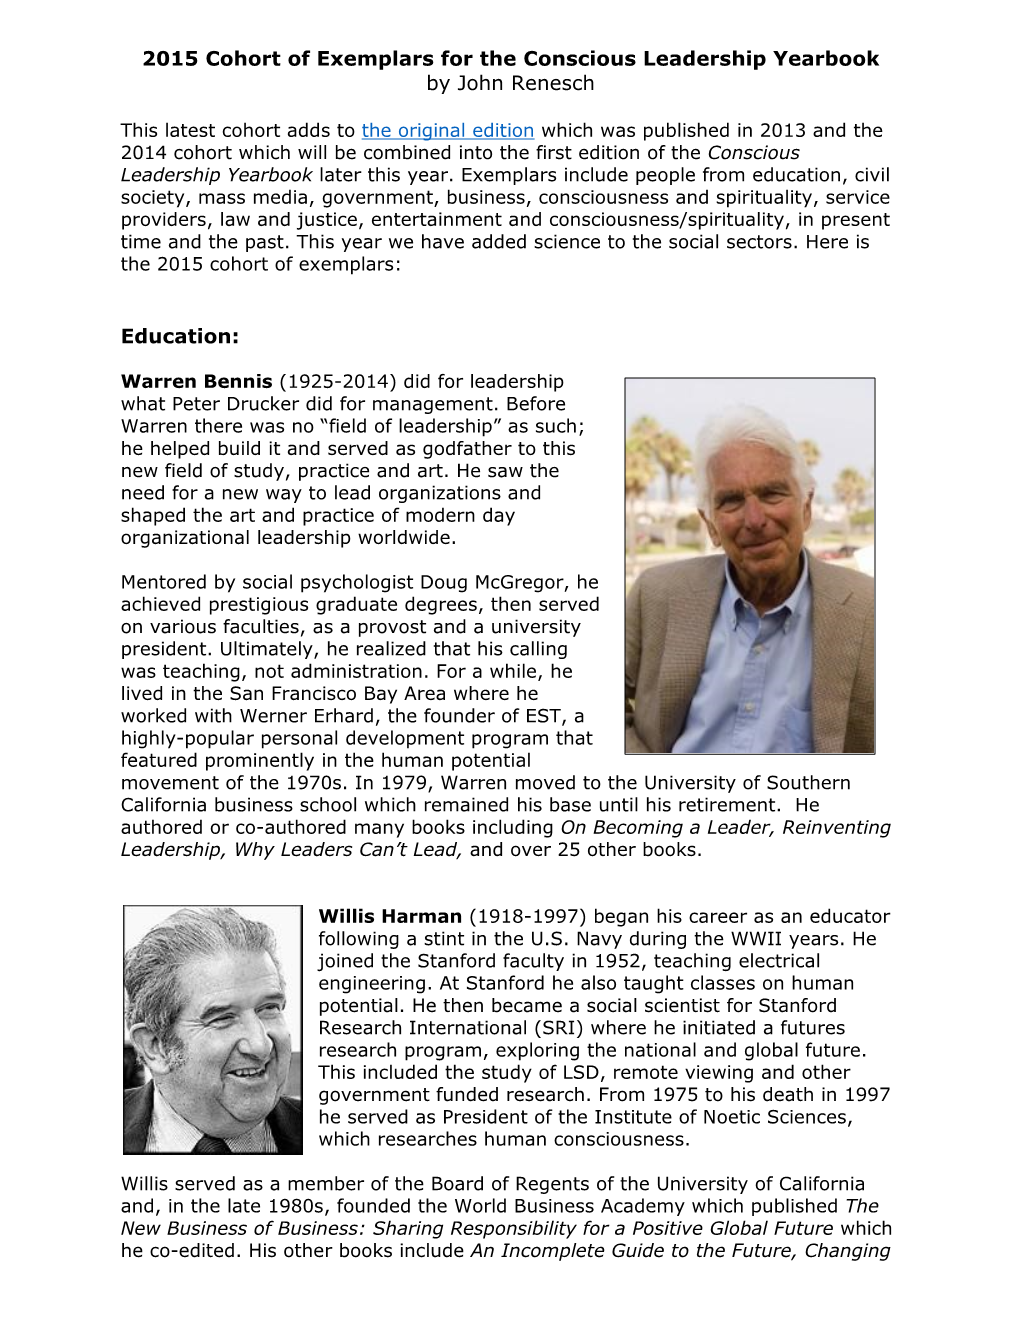 2015 Cohort of Exemplars for the Conscious Leadership Yearbook by John Renesch